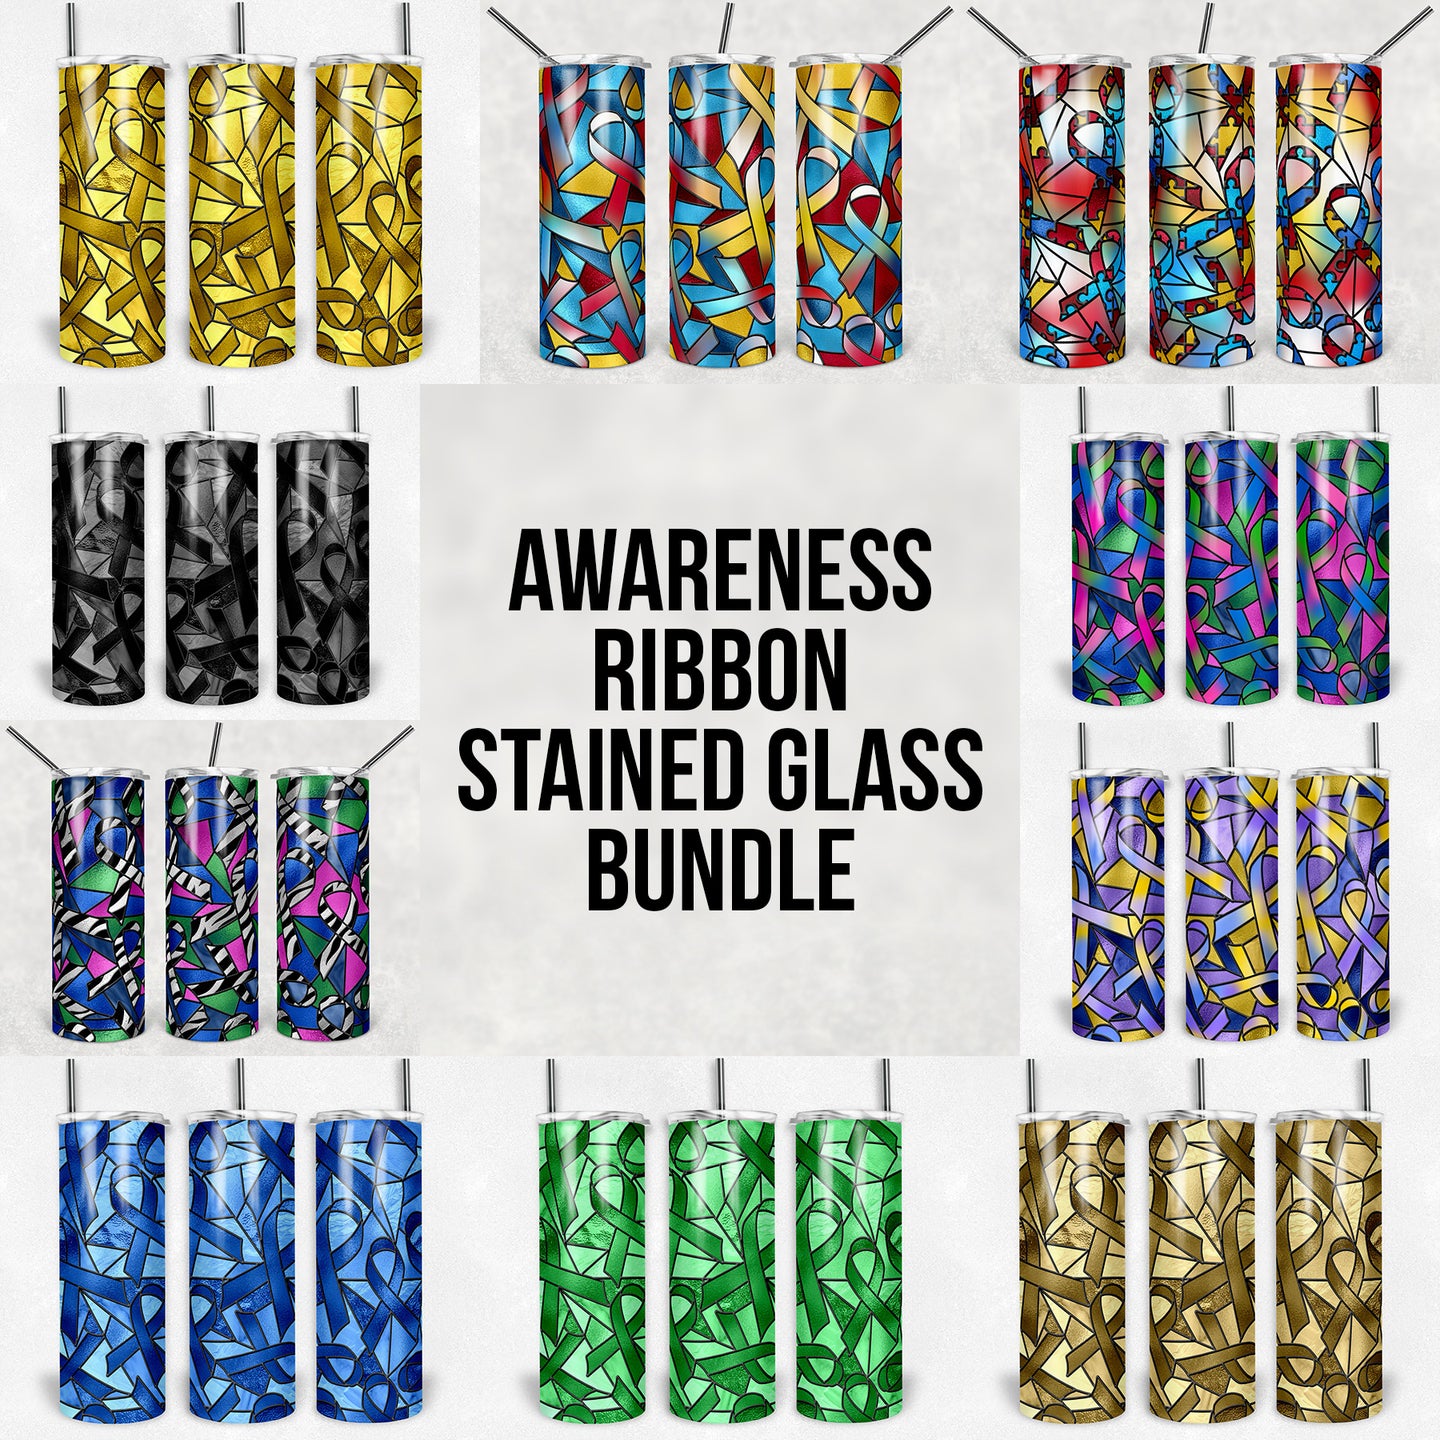 Awareness Ribbon Stained Glass Bundle - Limited Time